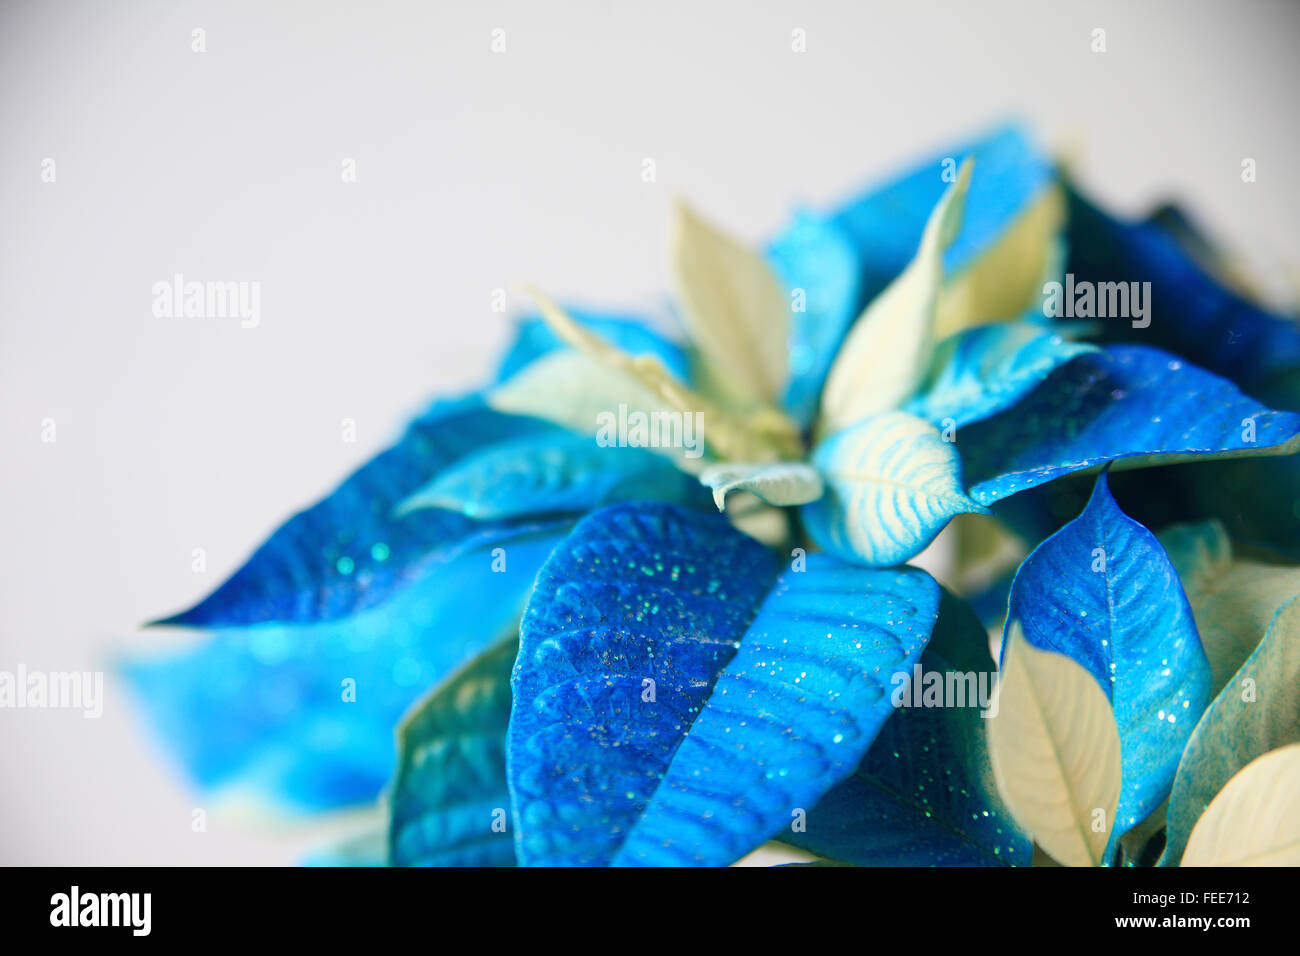 Christmas plant dyed blue and sprinkled with glitter Stock Photo